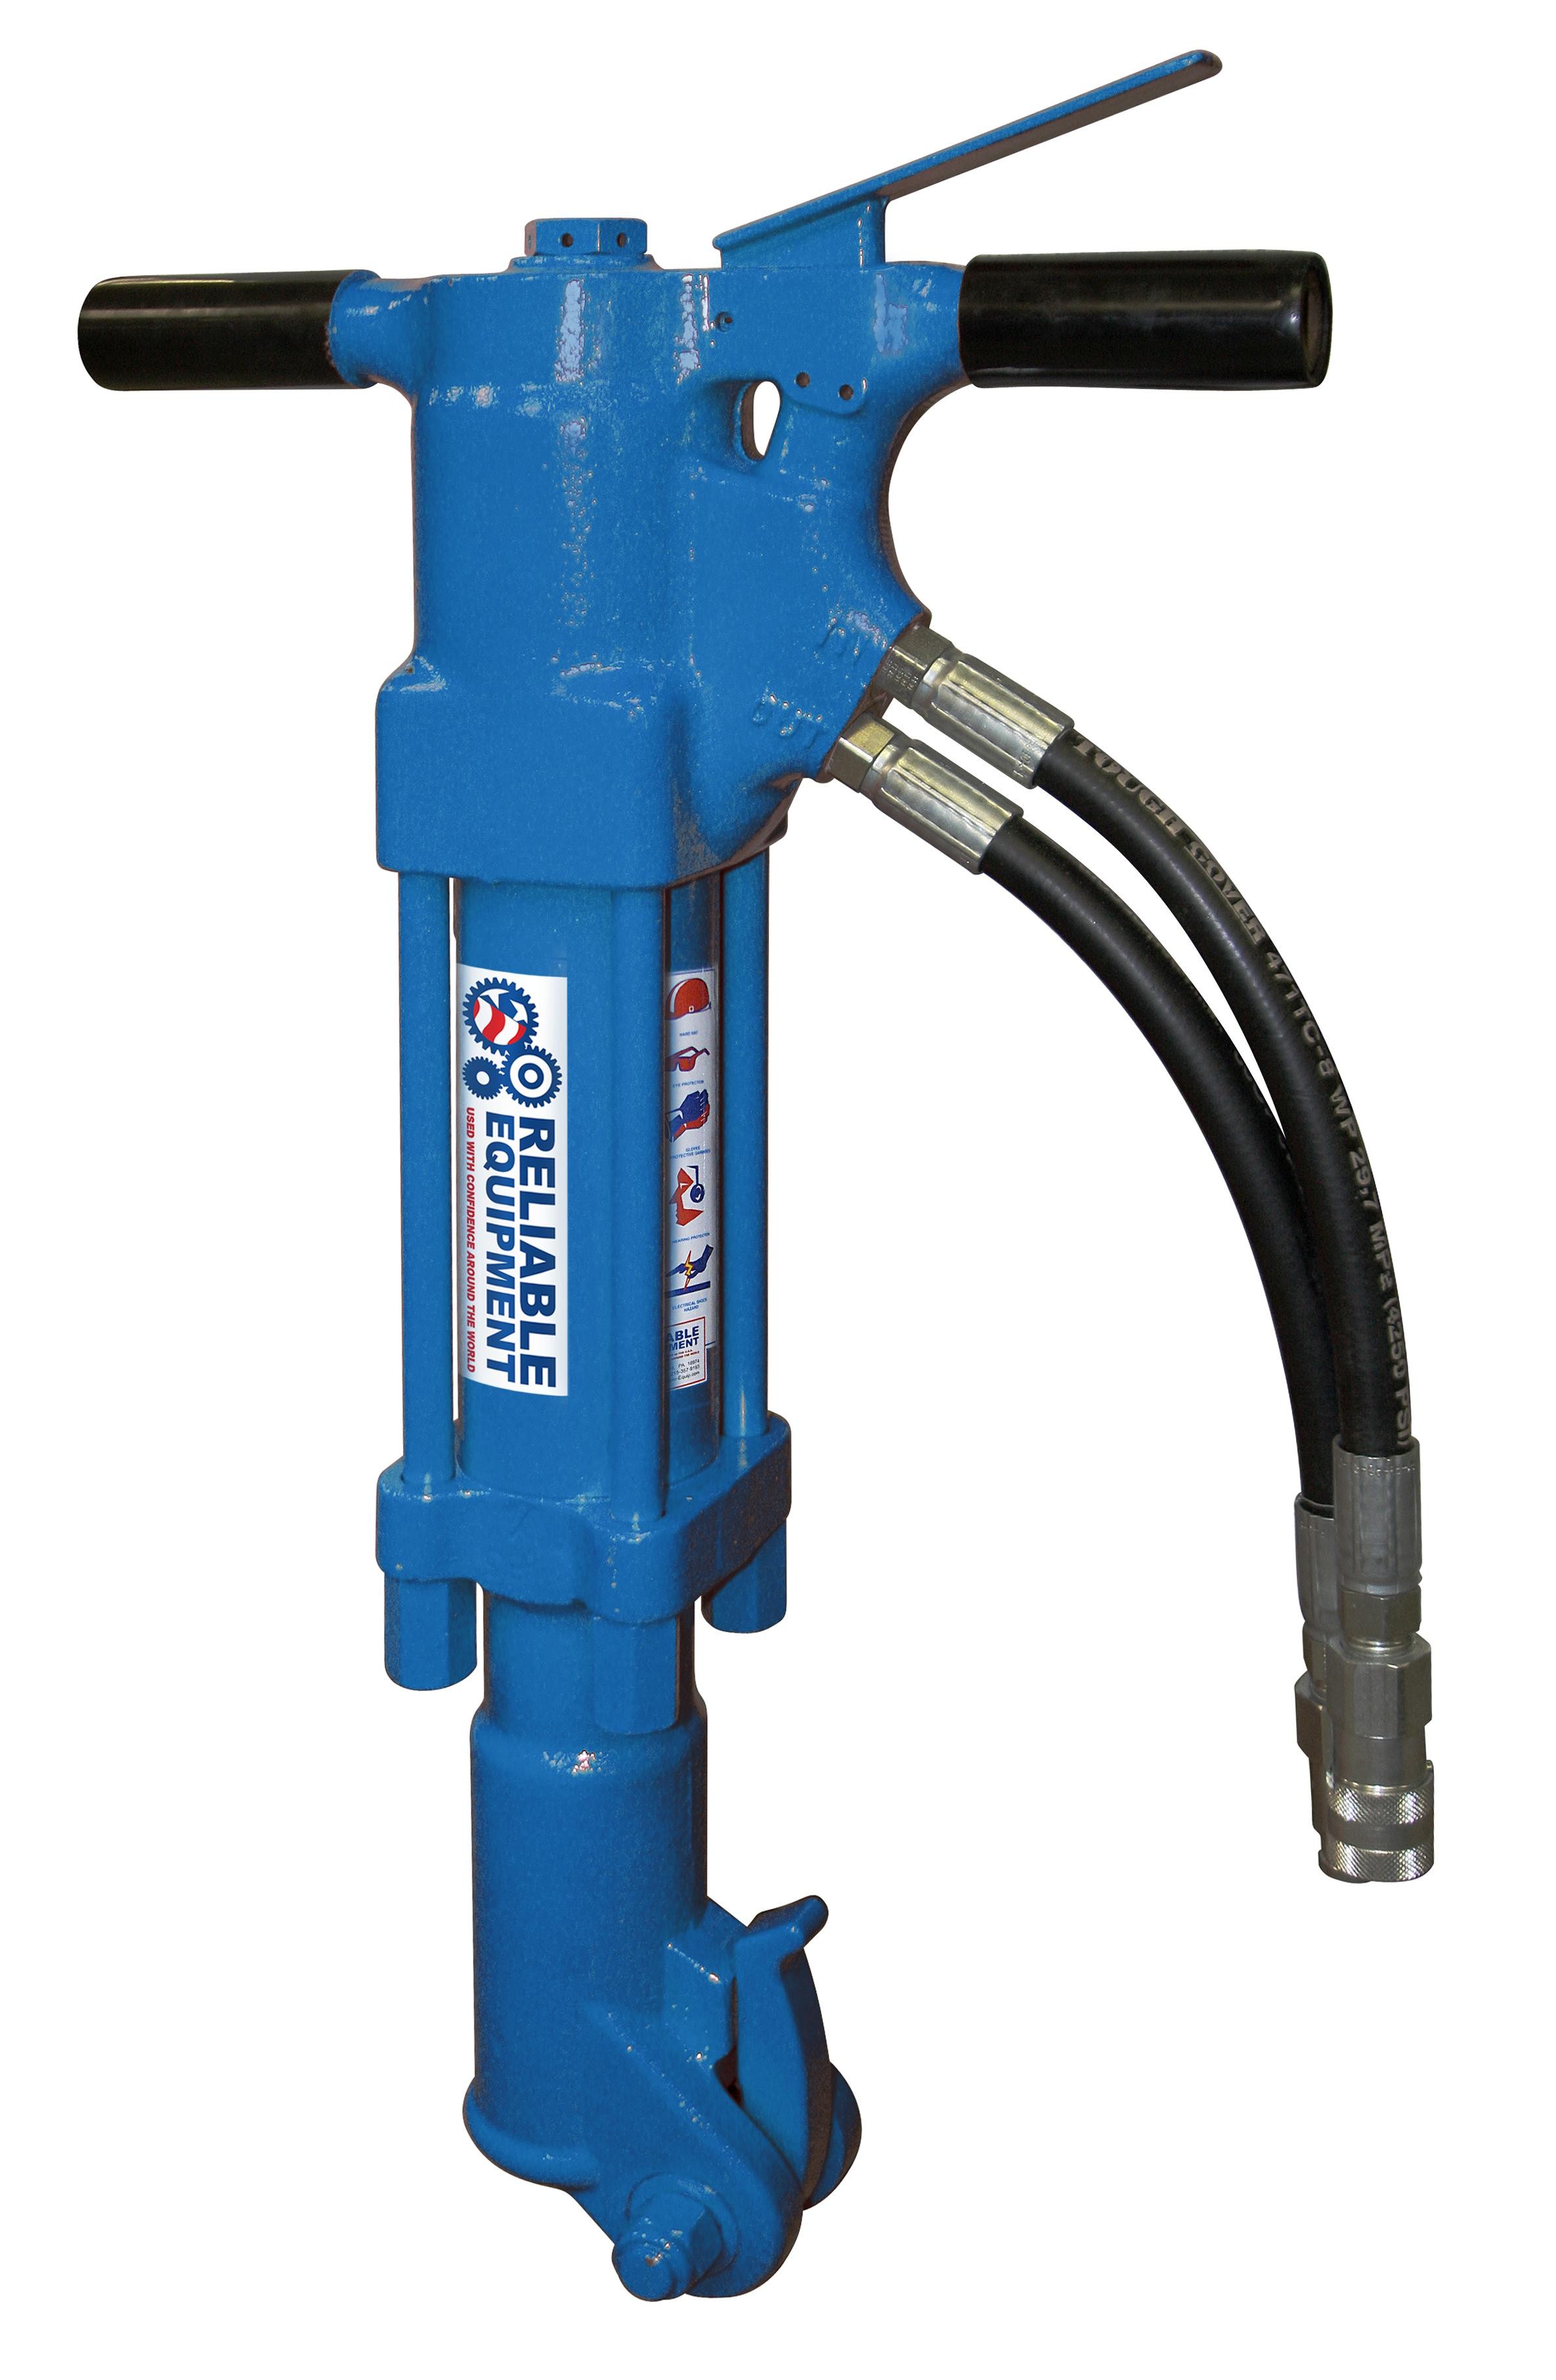 Reliable Equipment REL-45BR Hydraulic 1-1/8" Shank Medium Duty Breaker (Includes Hose Whips & Couplers)